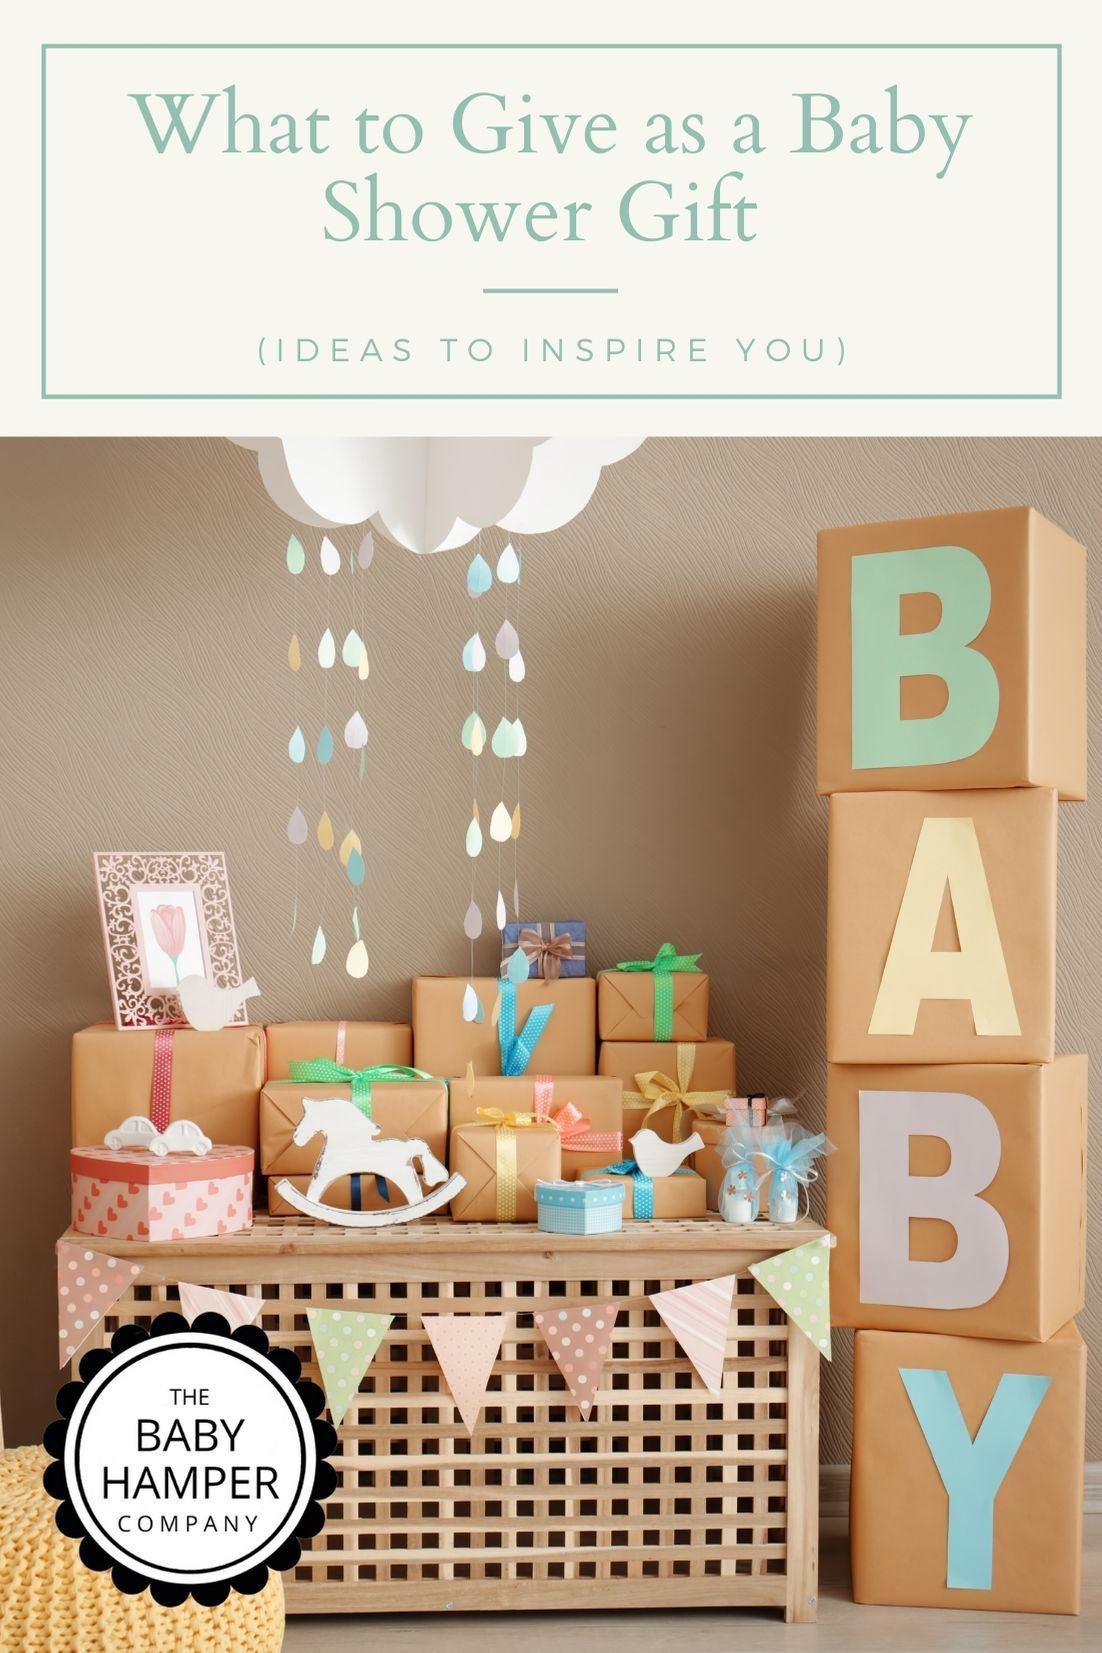 What to give as a baby shower gift